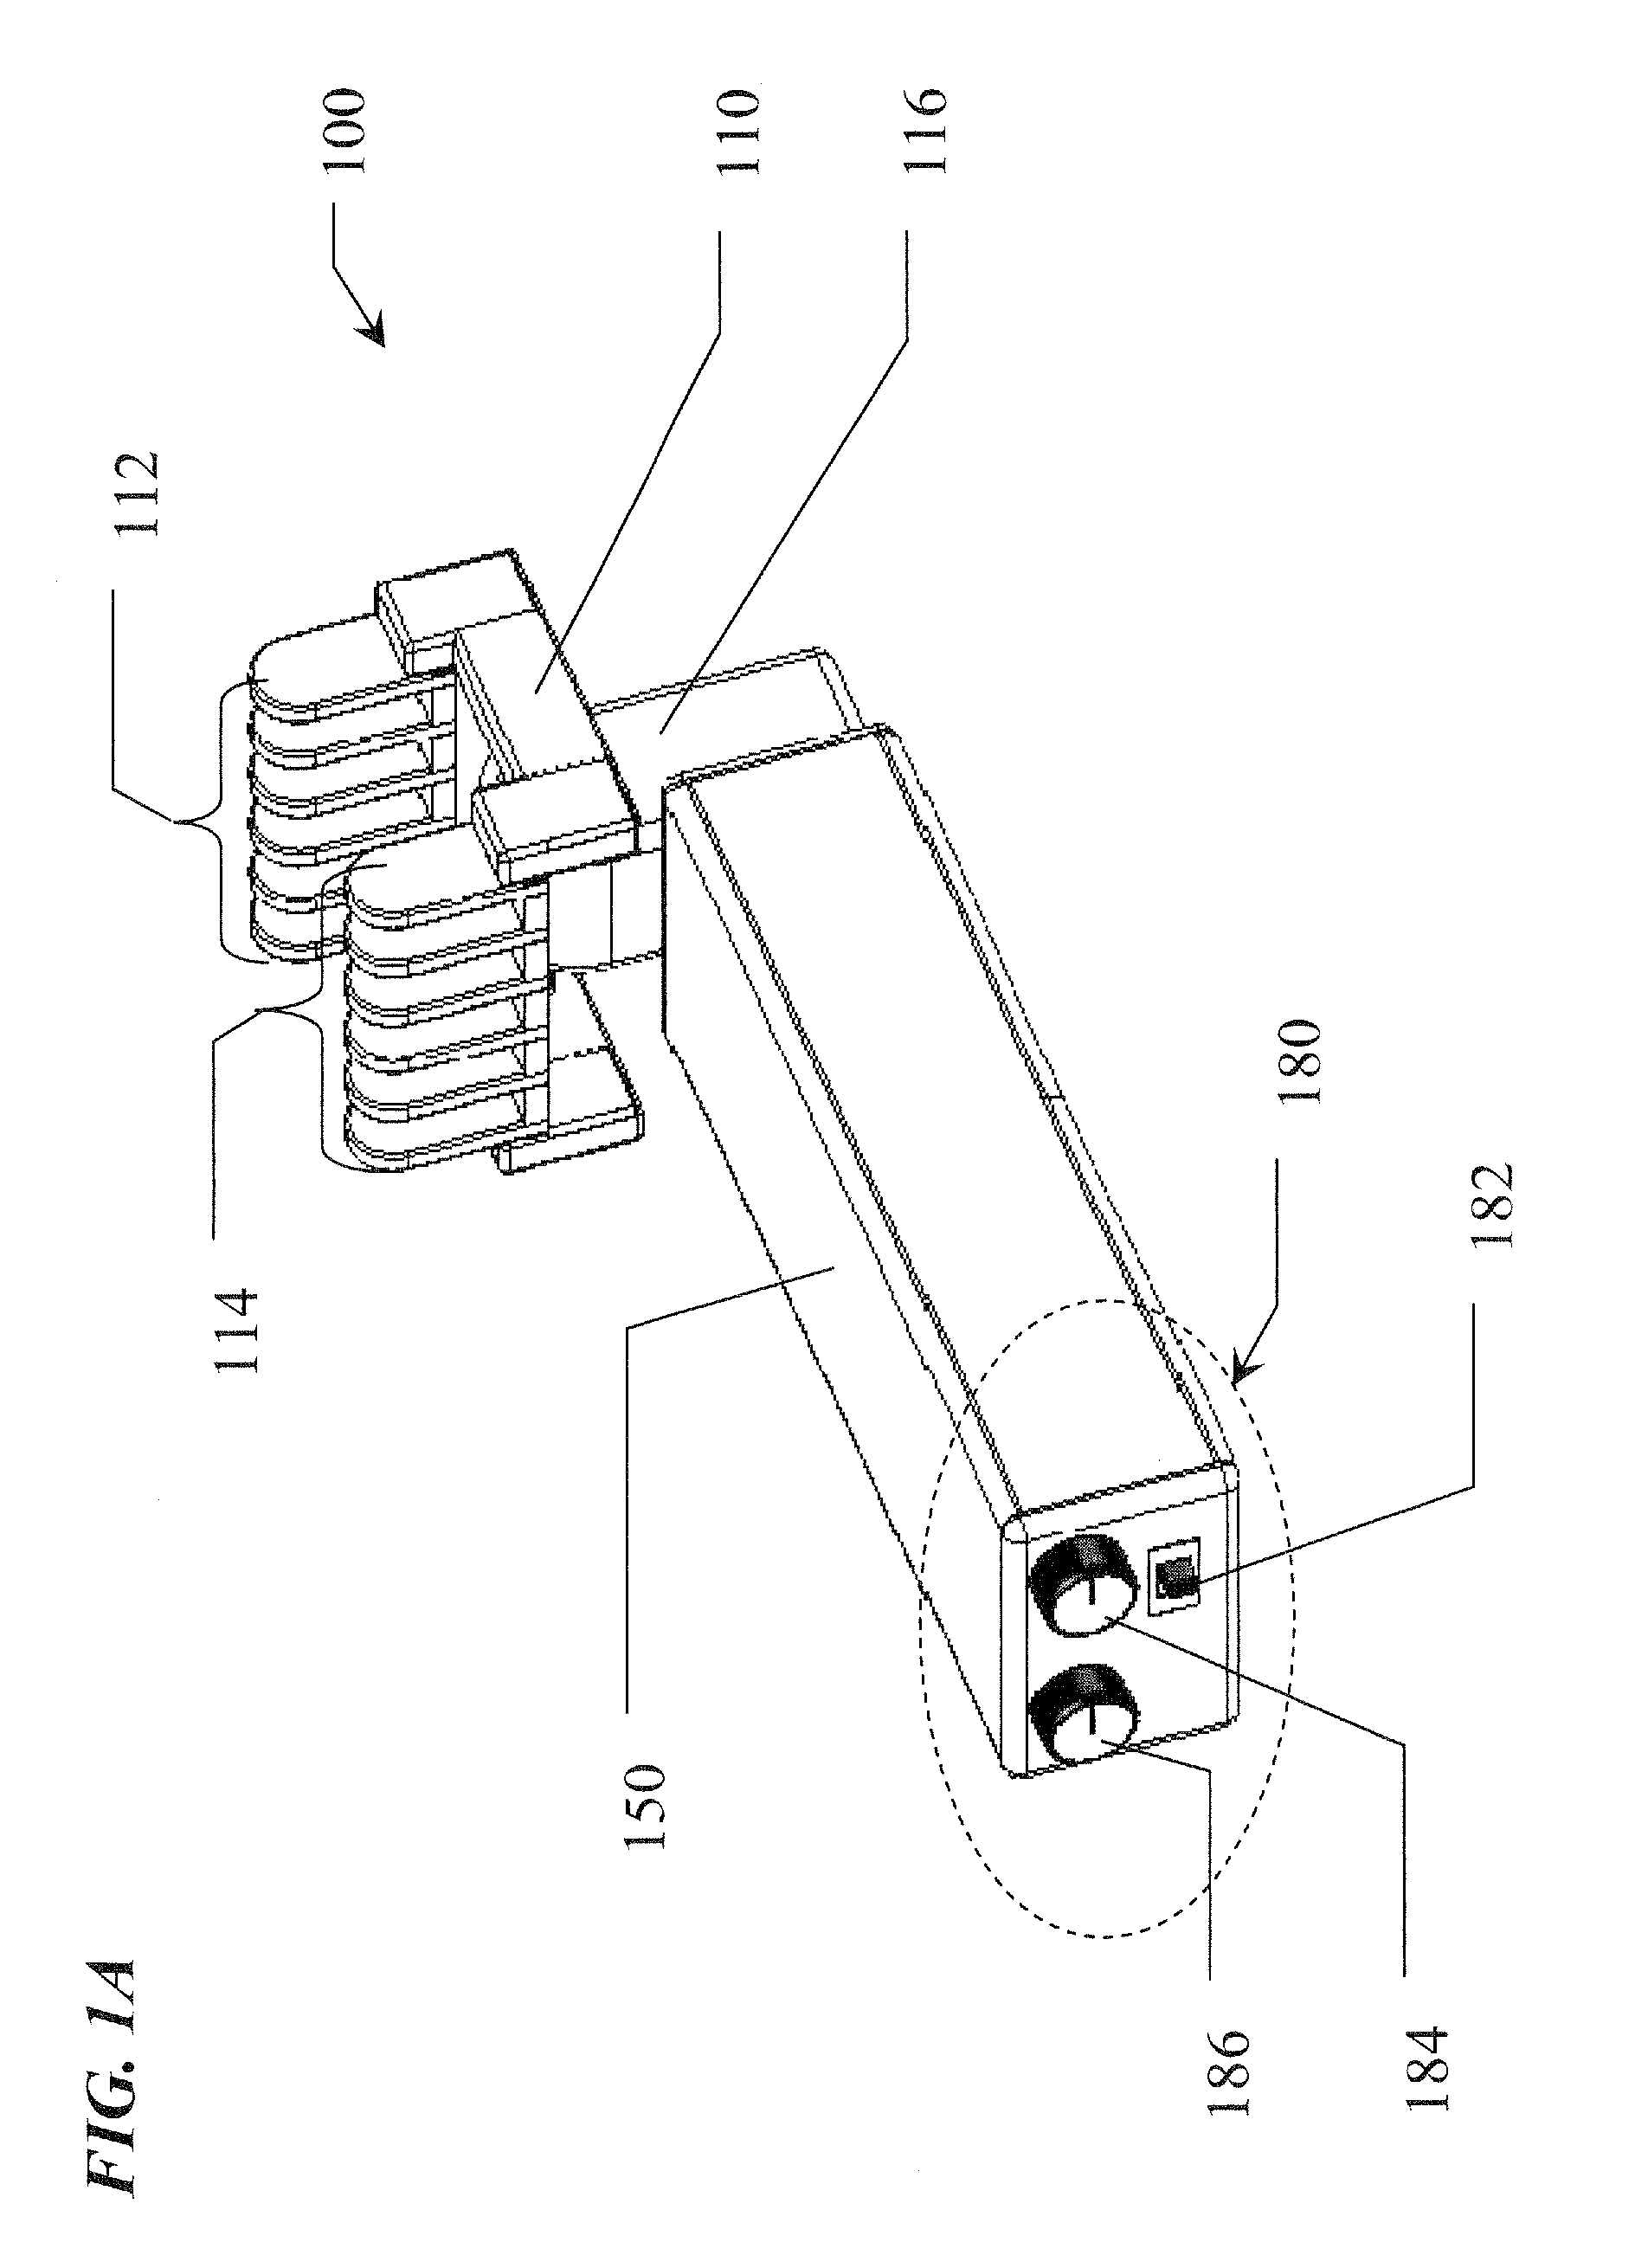 Apparatus and method for the treatment of headache